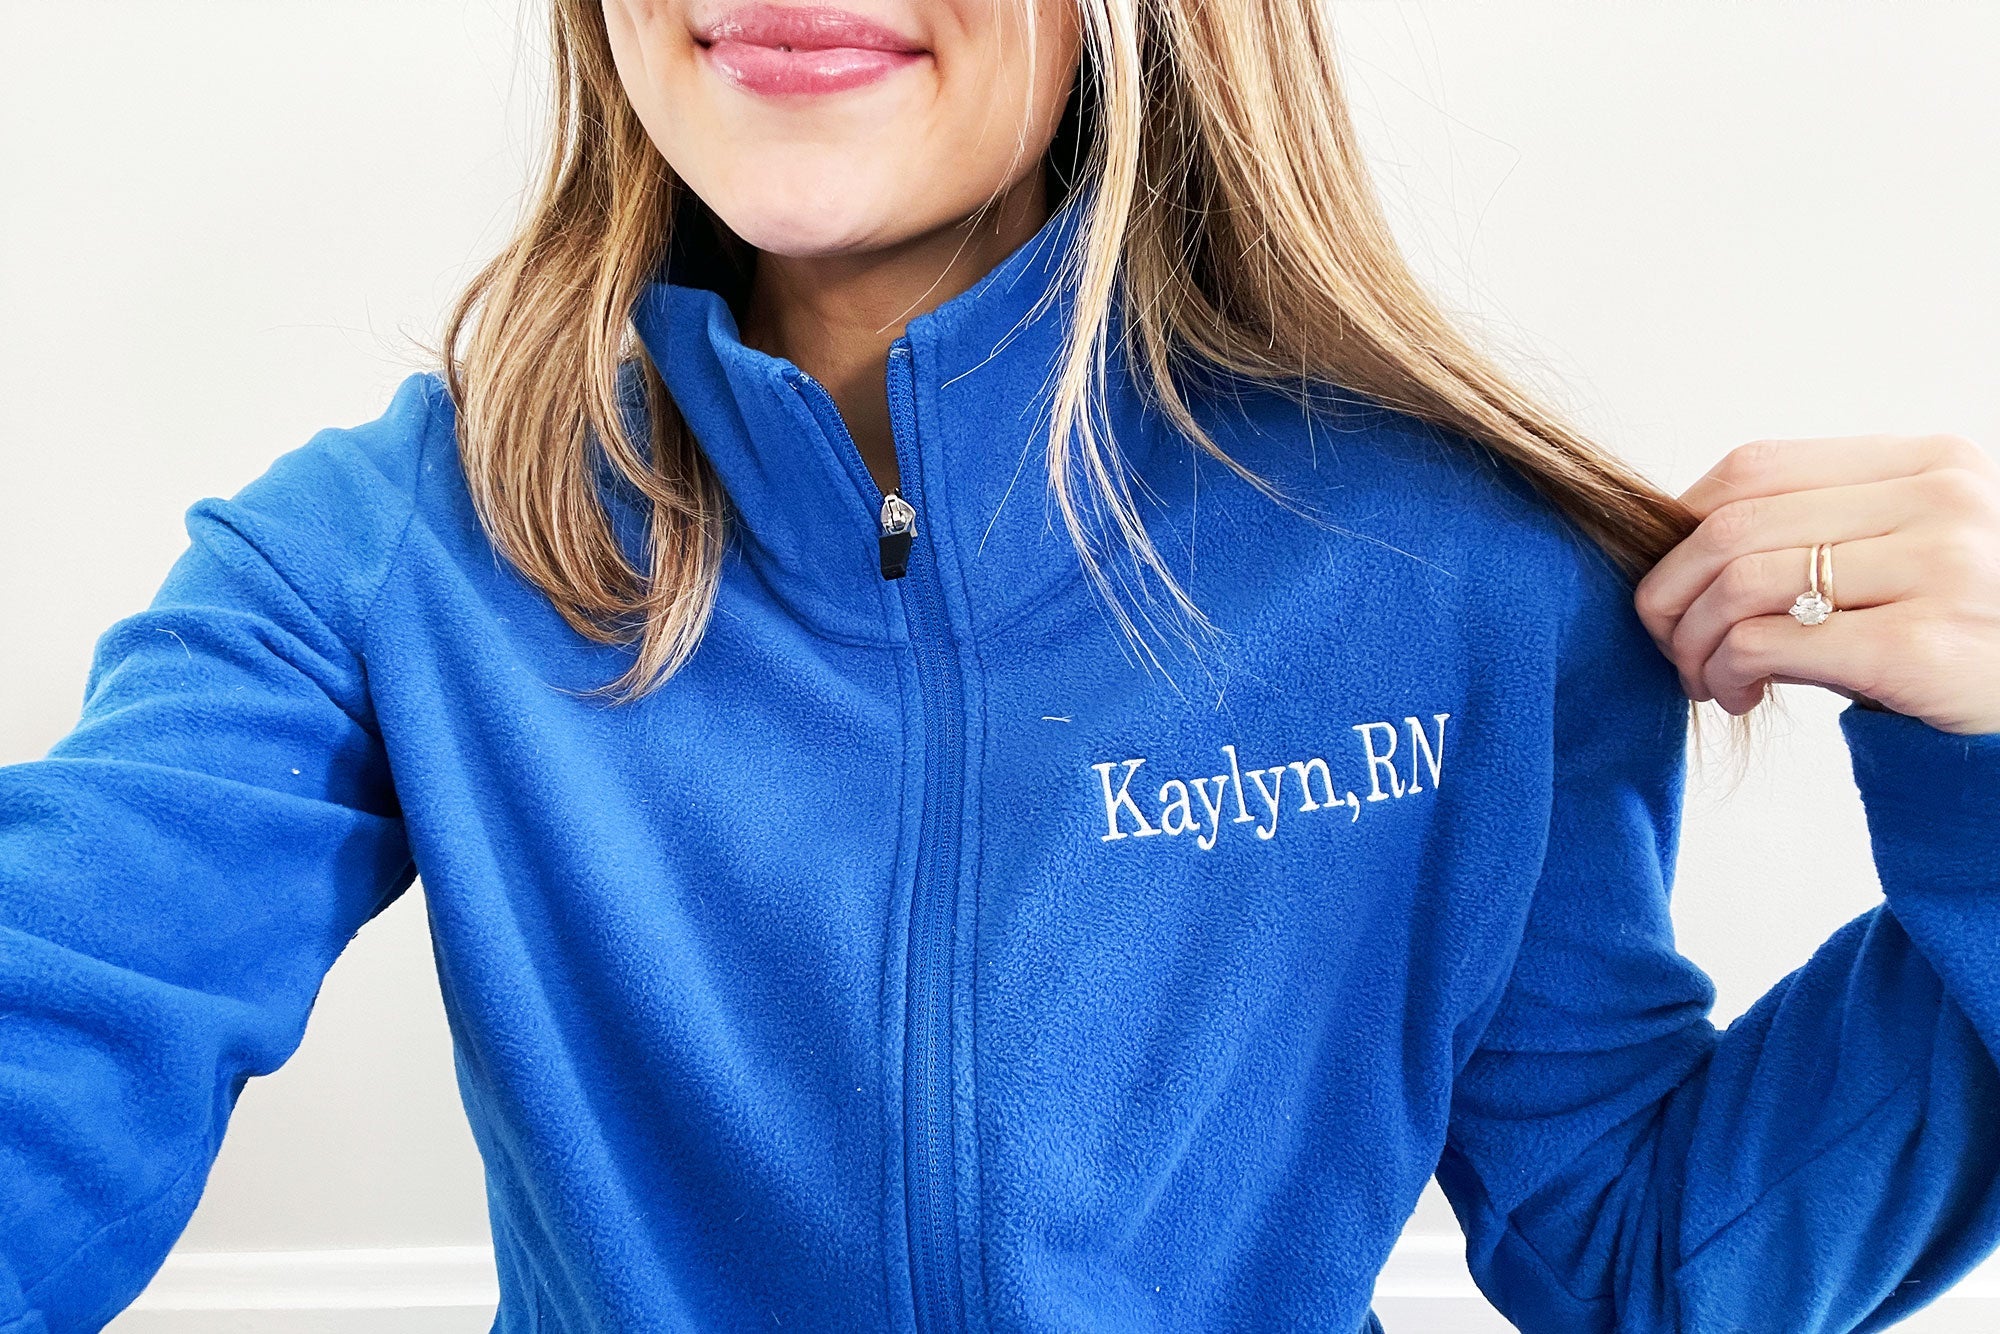 Nurse Jacket Quarter-Zip Pullover with Personalized Embroidery | Sew  Perfect Design Co.